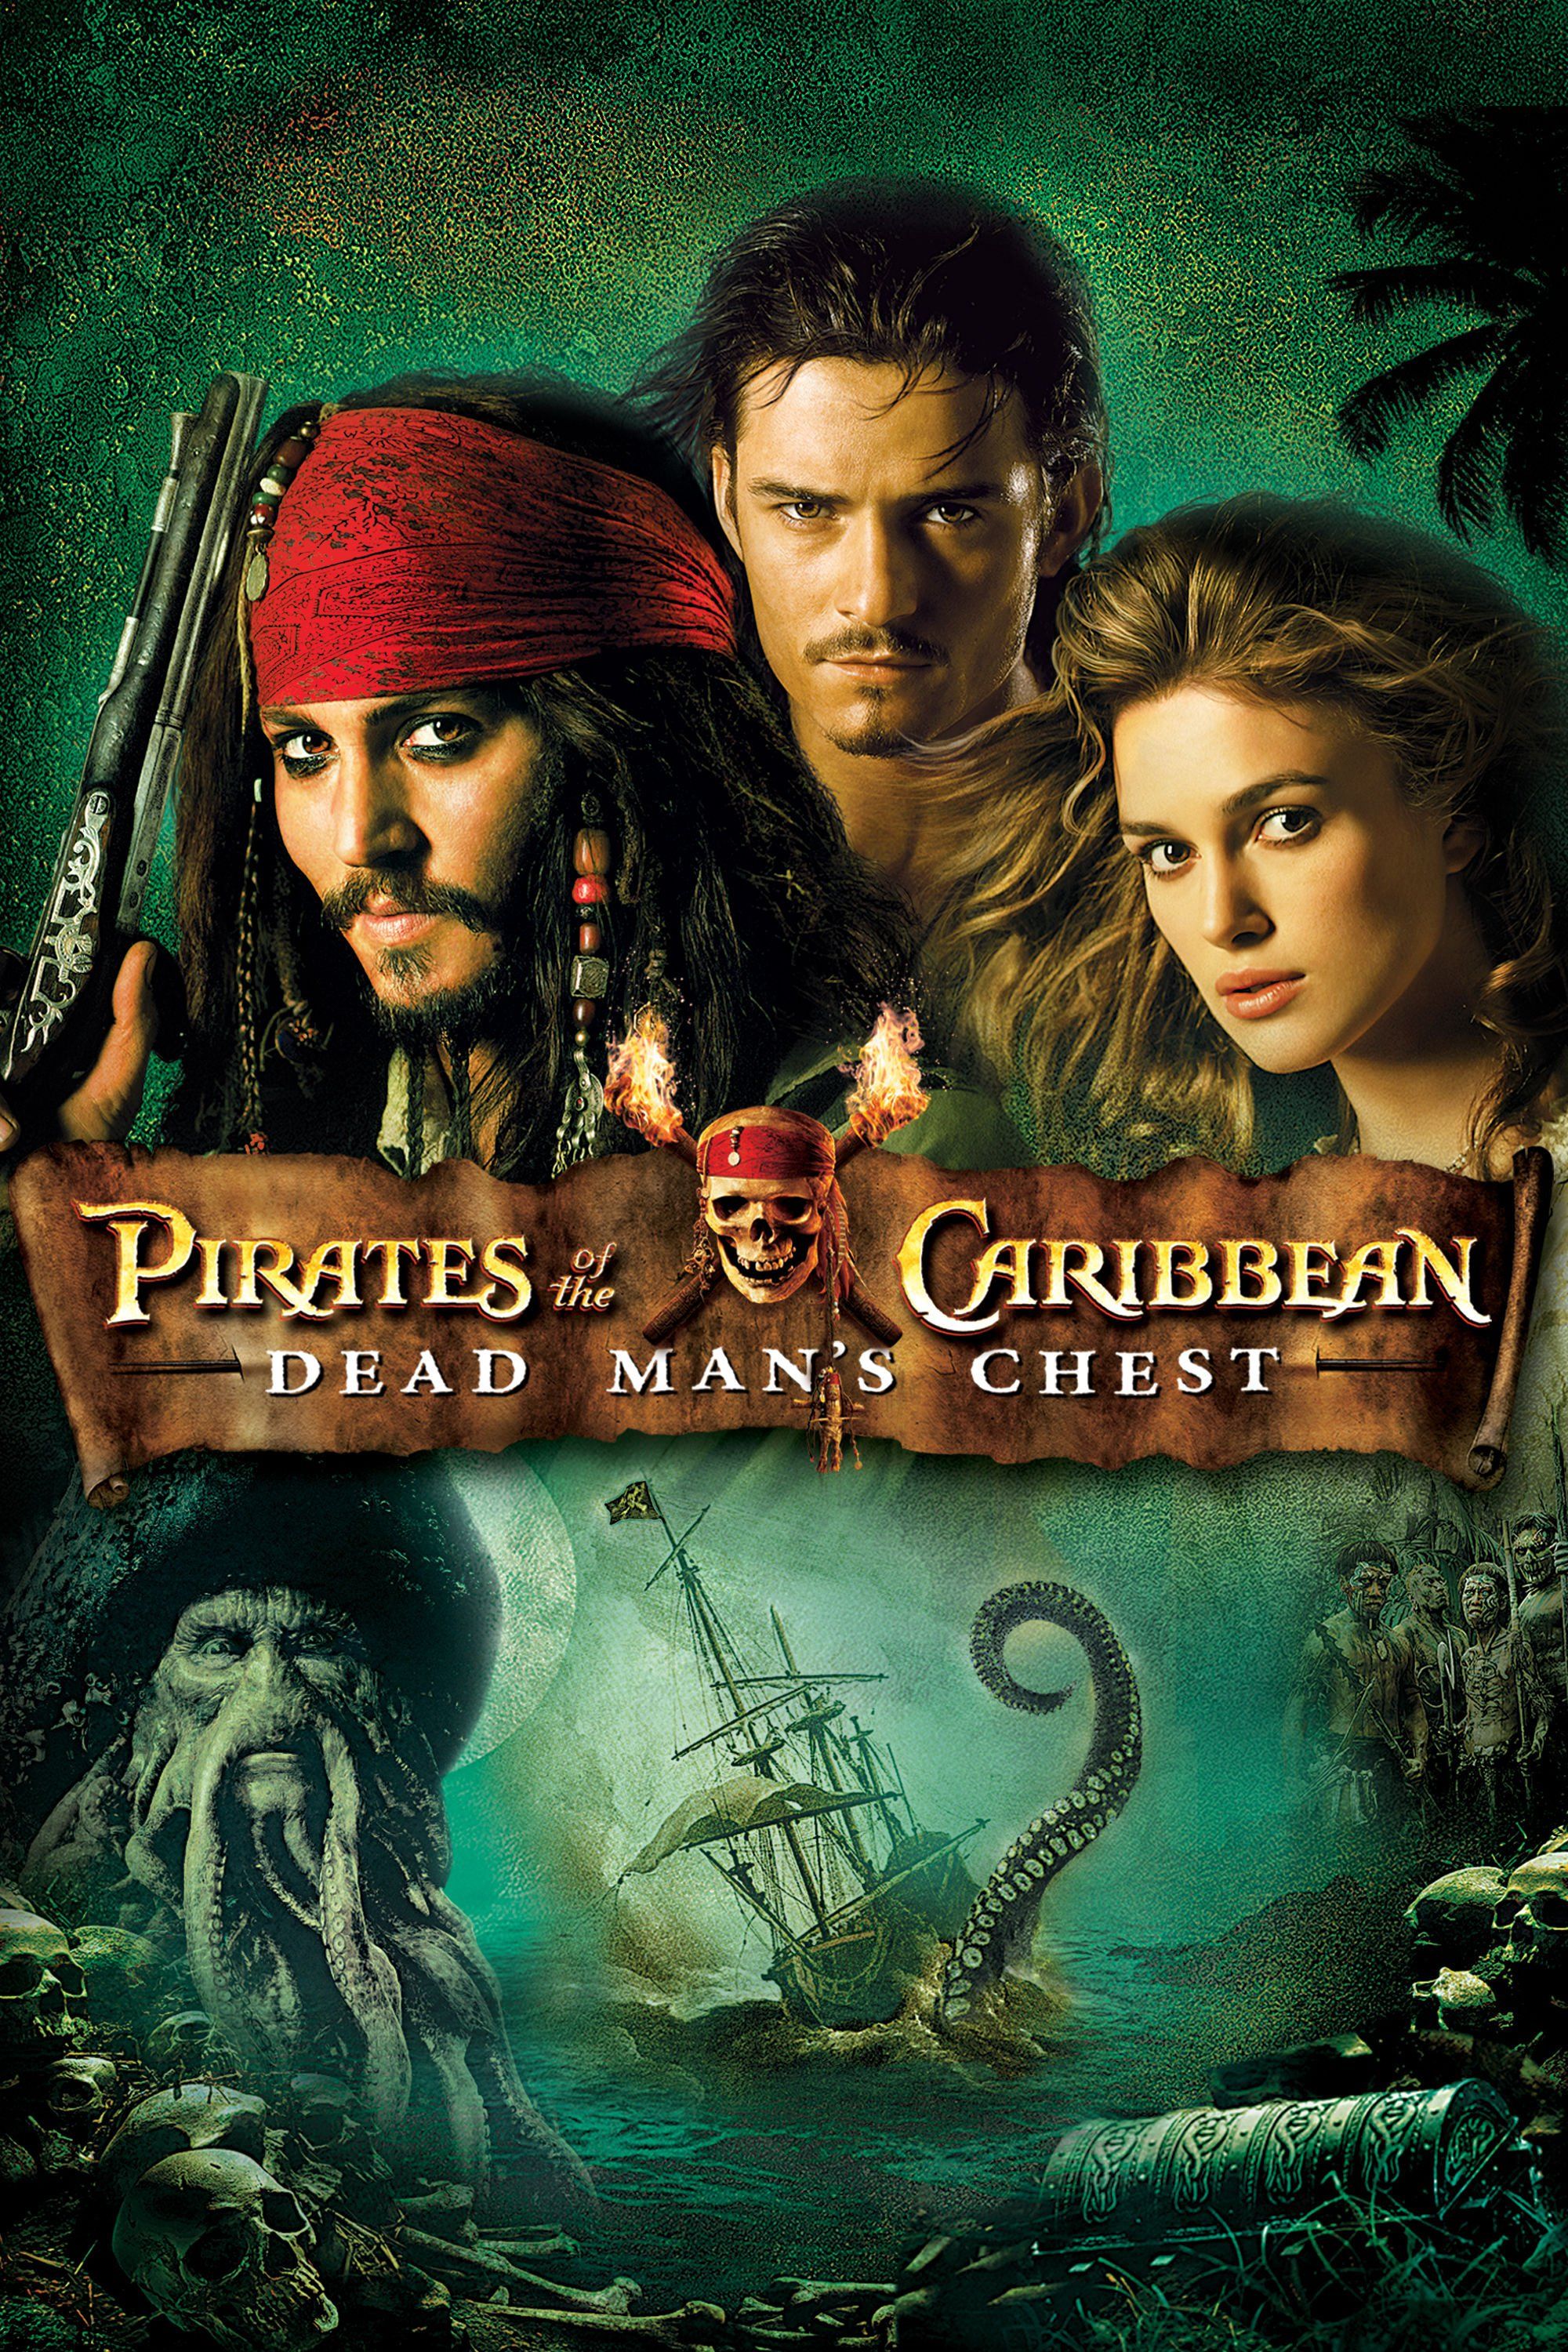 watch pirates of the caribbean full movie